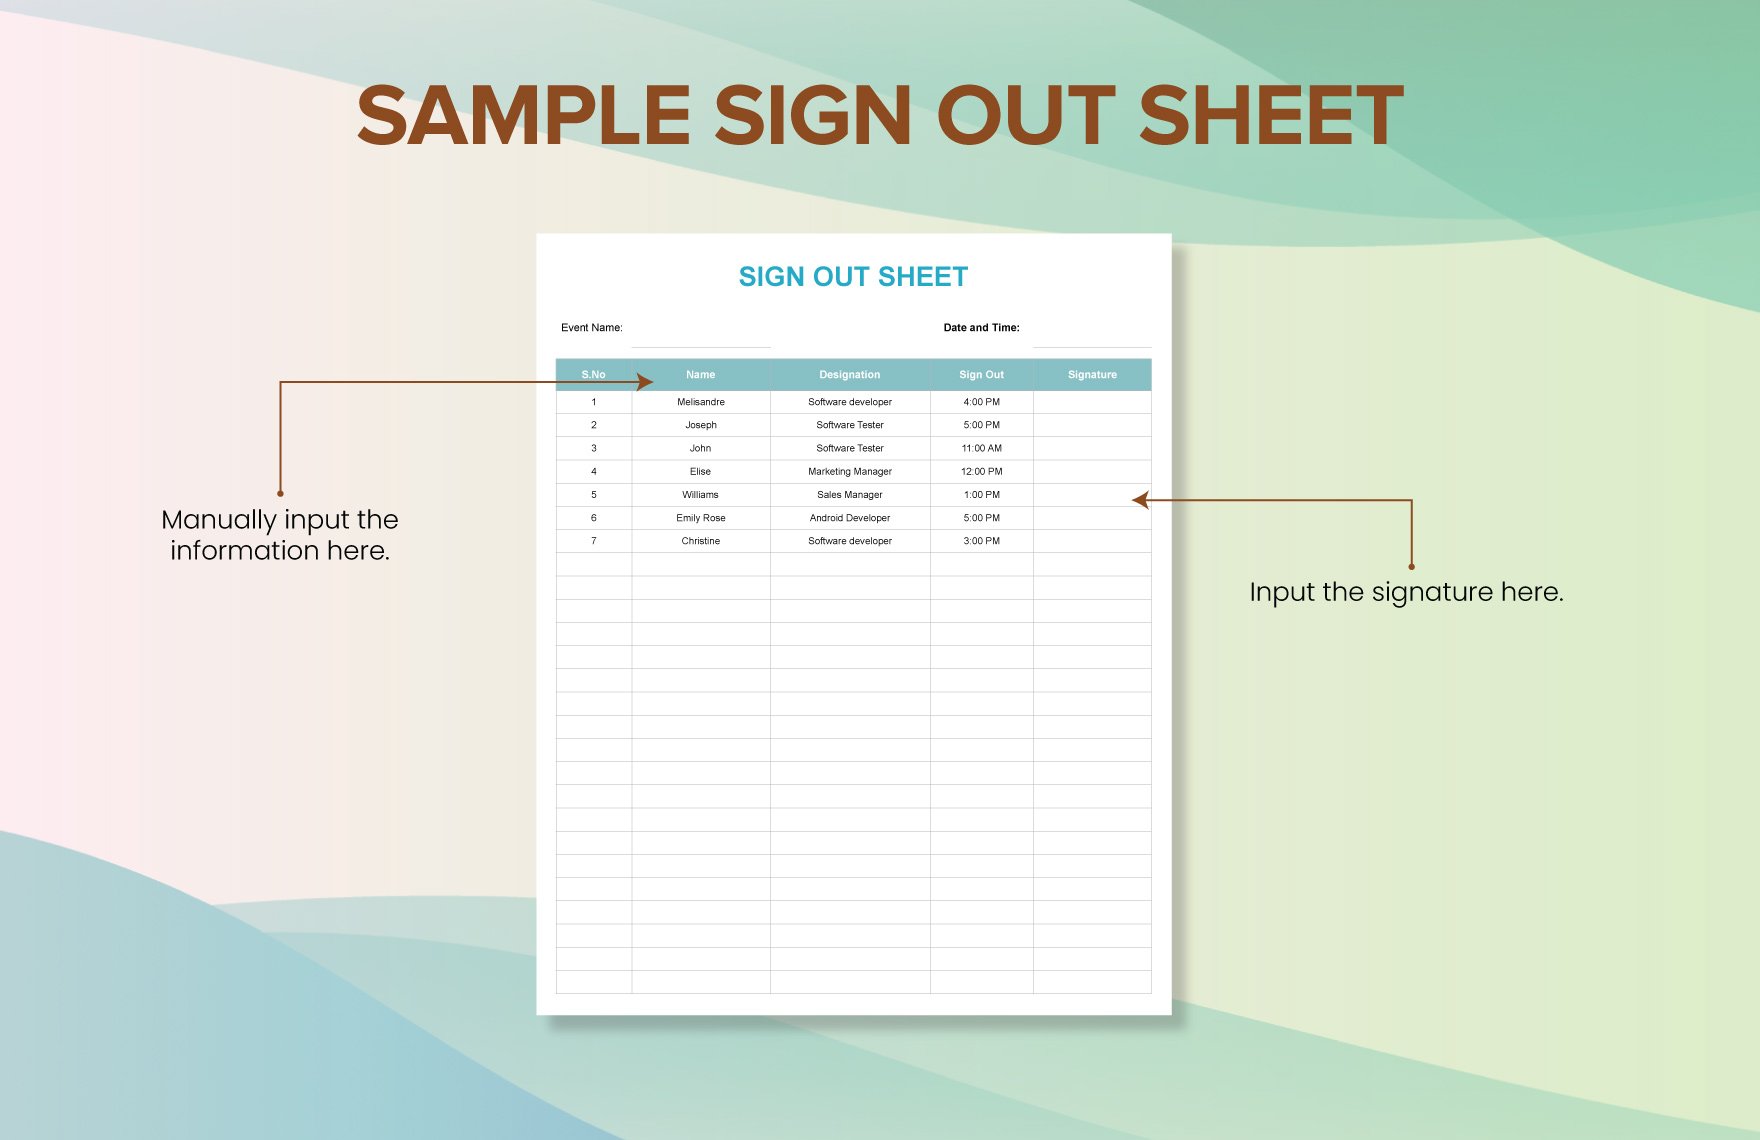 Sample Sign Out Sheet Template